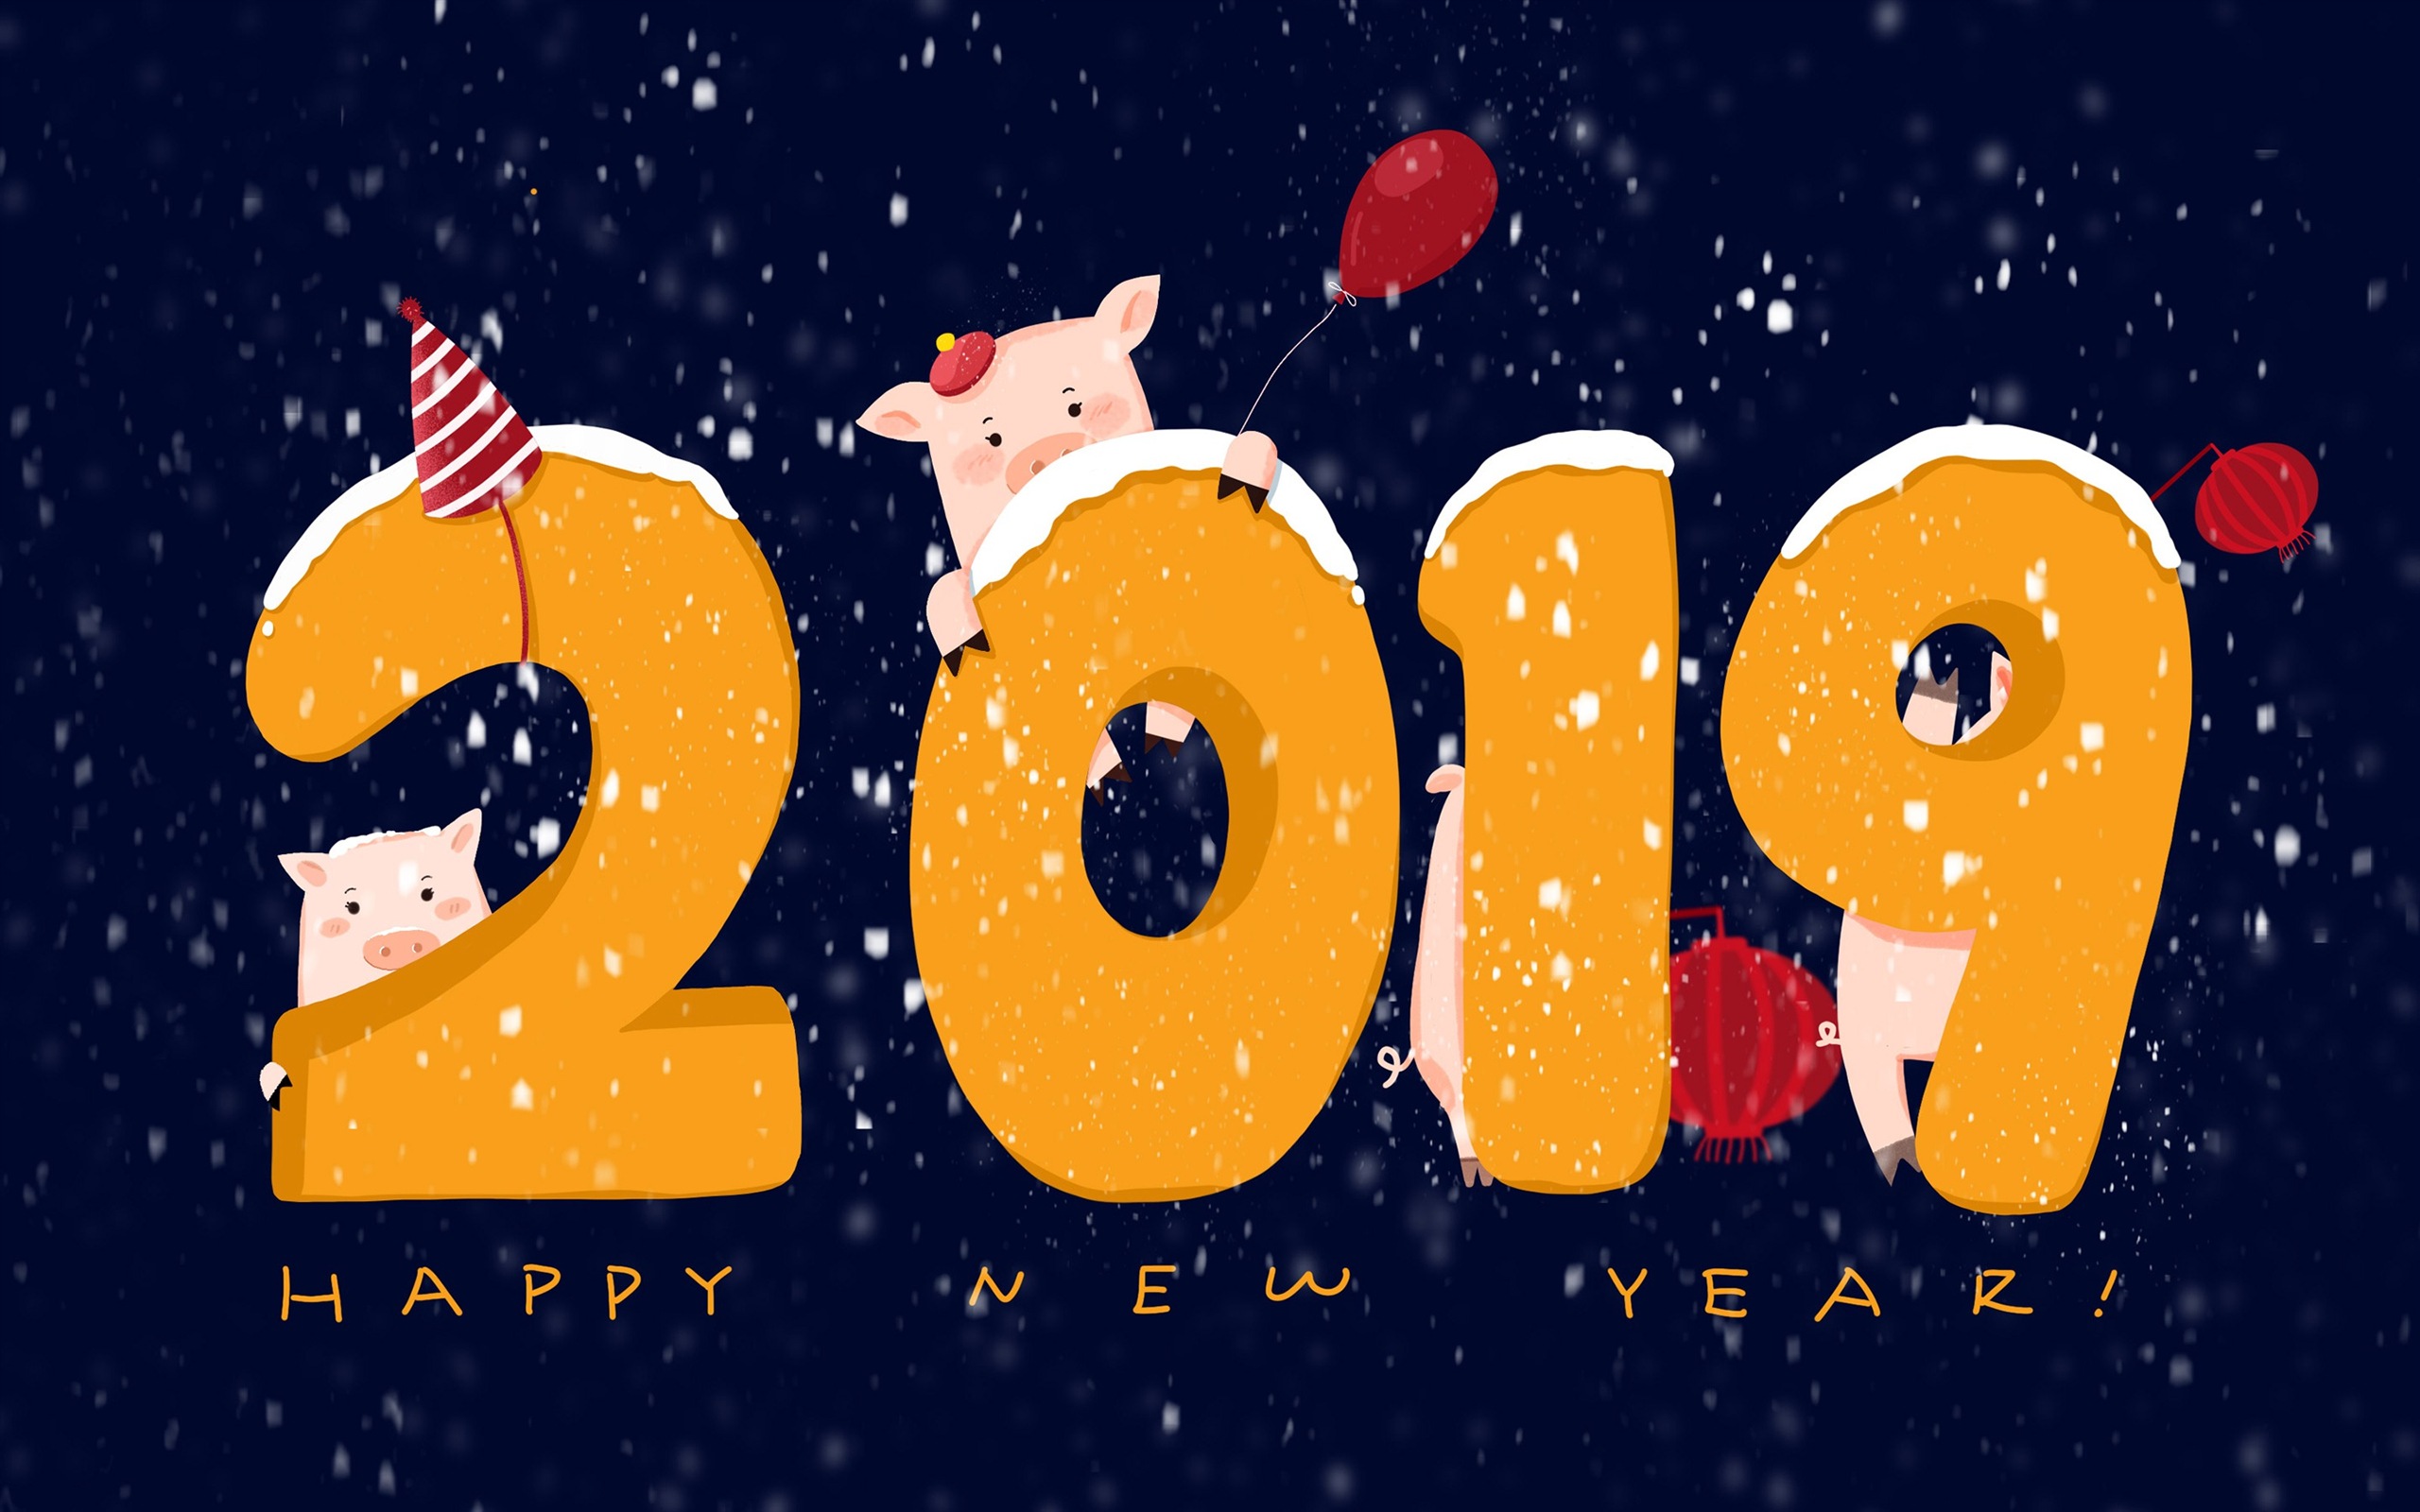 Happy New Year 2019 HD wallpapers #18 - 2560x1600